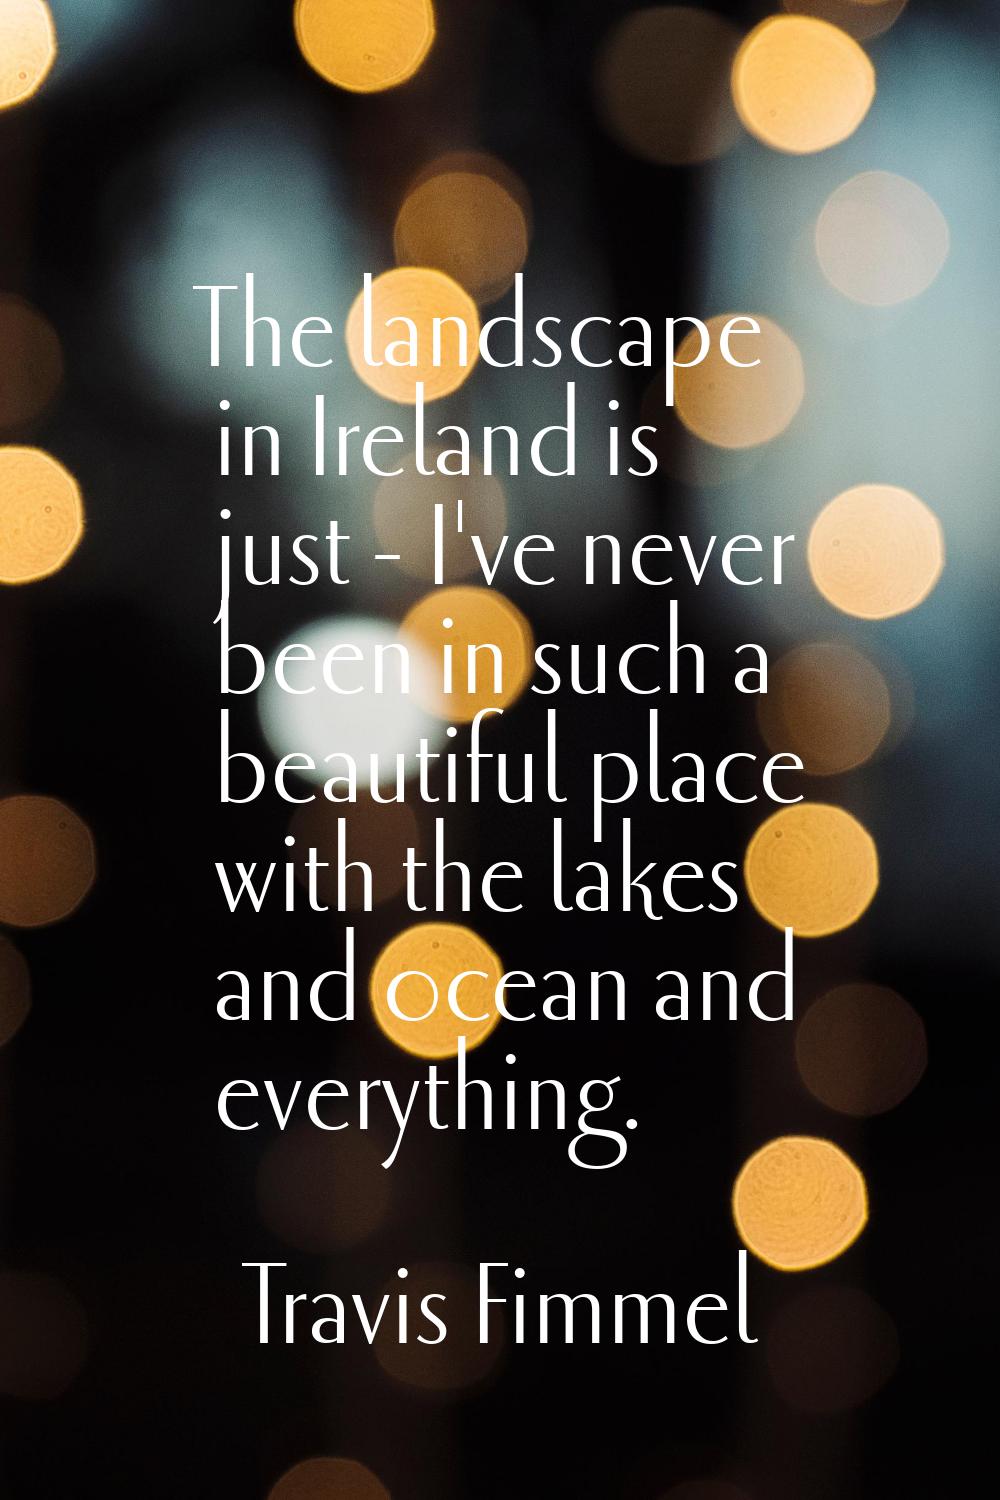 The landscape in Ireland is just - I've never been in such a beautiful place with the lakes and oce